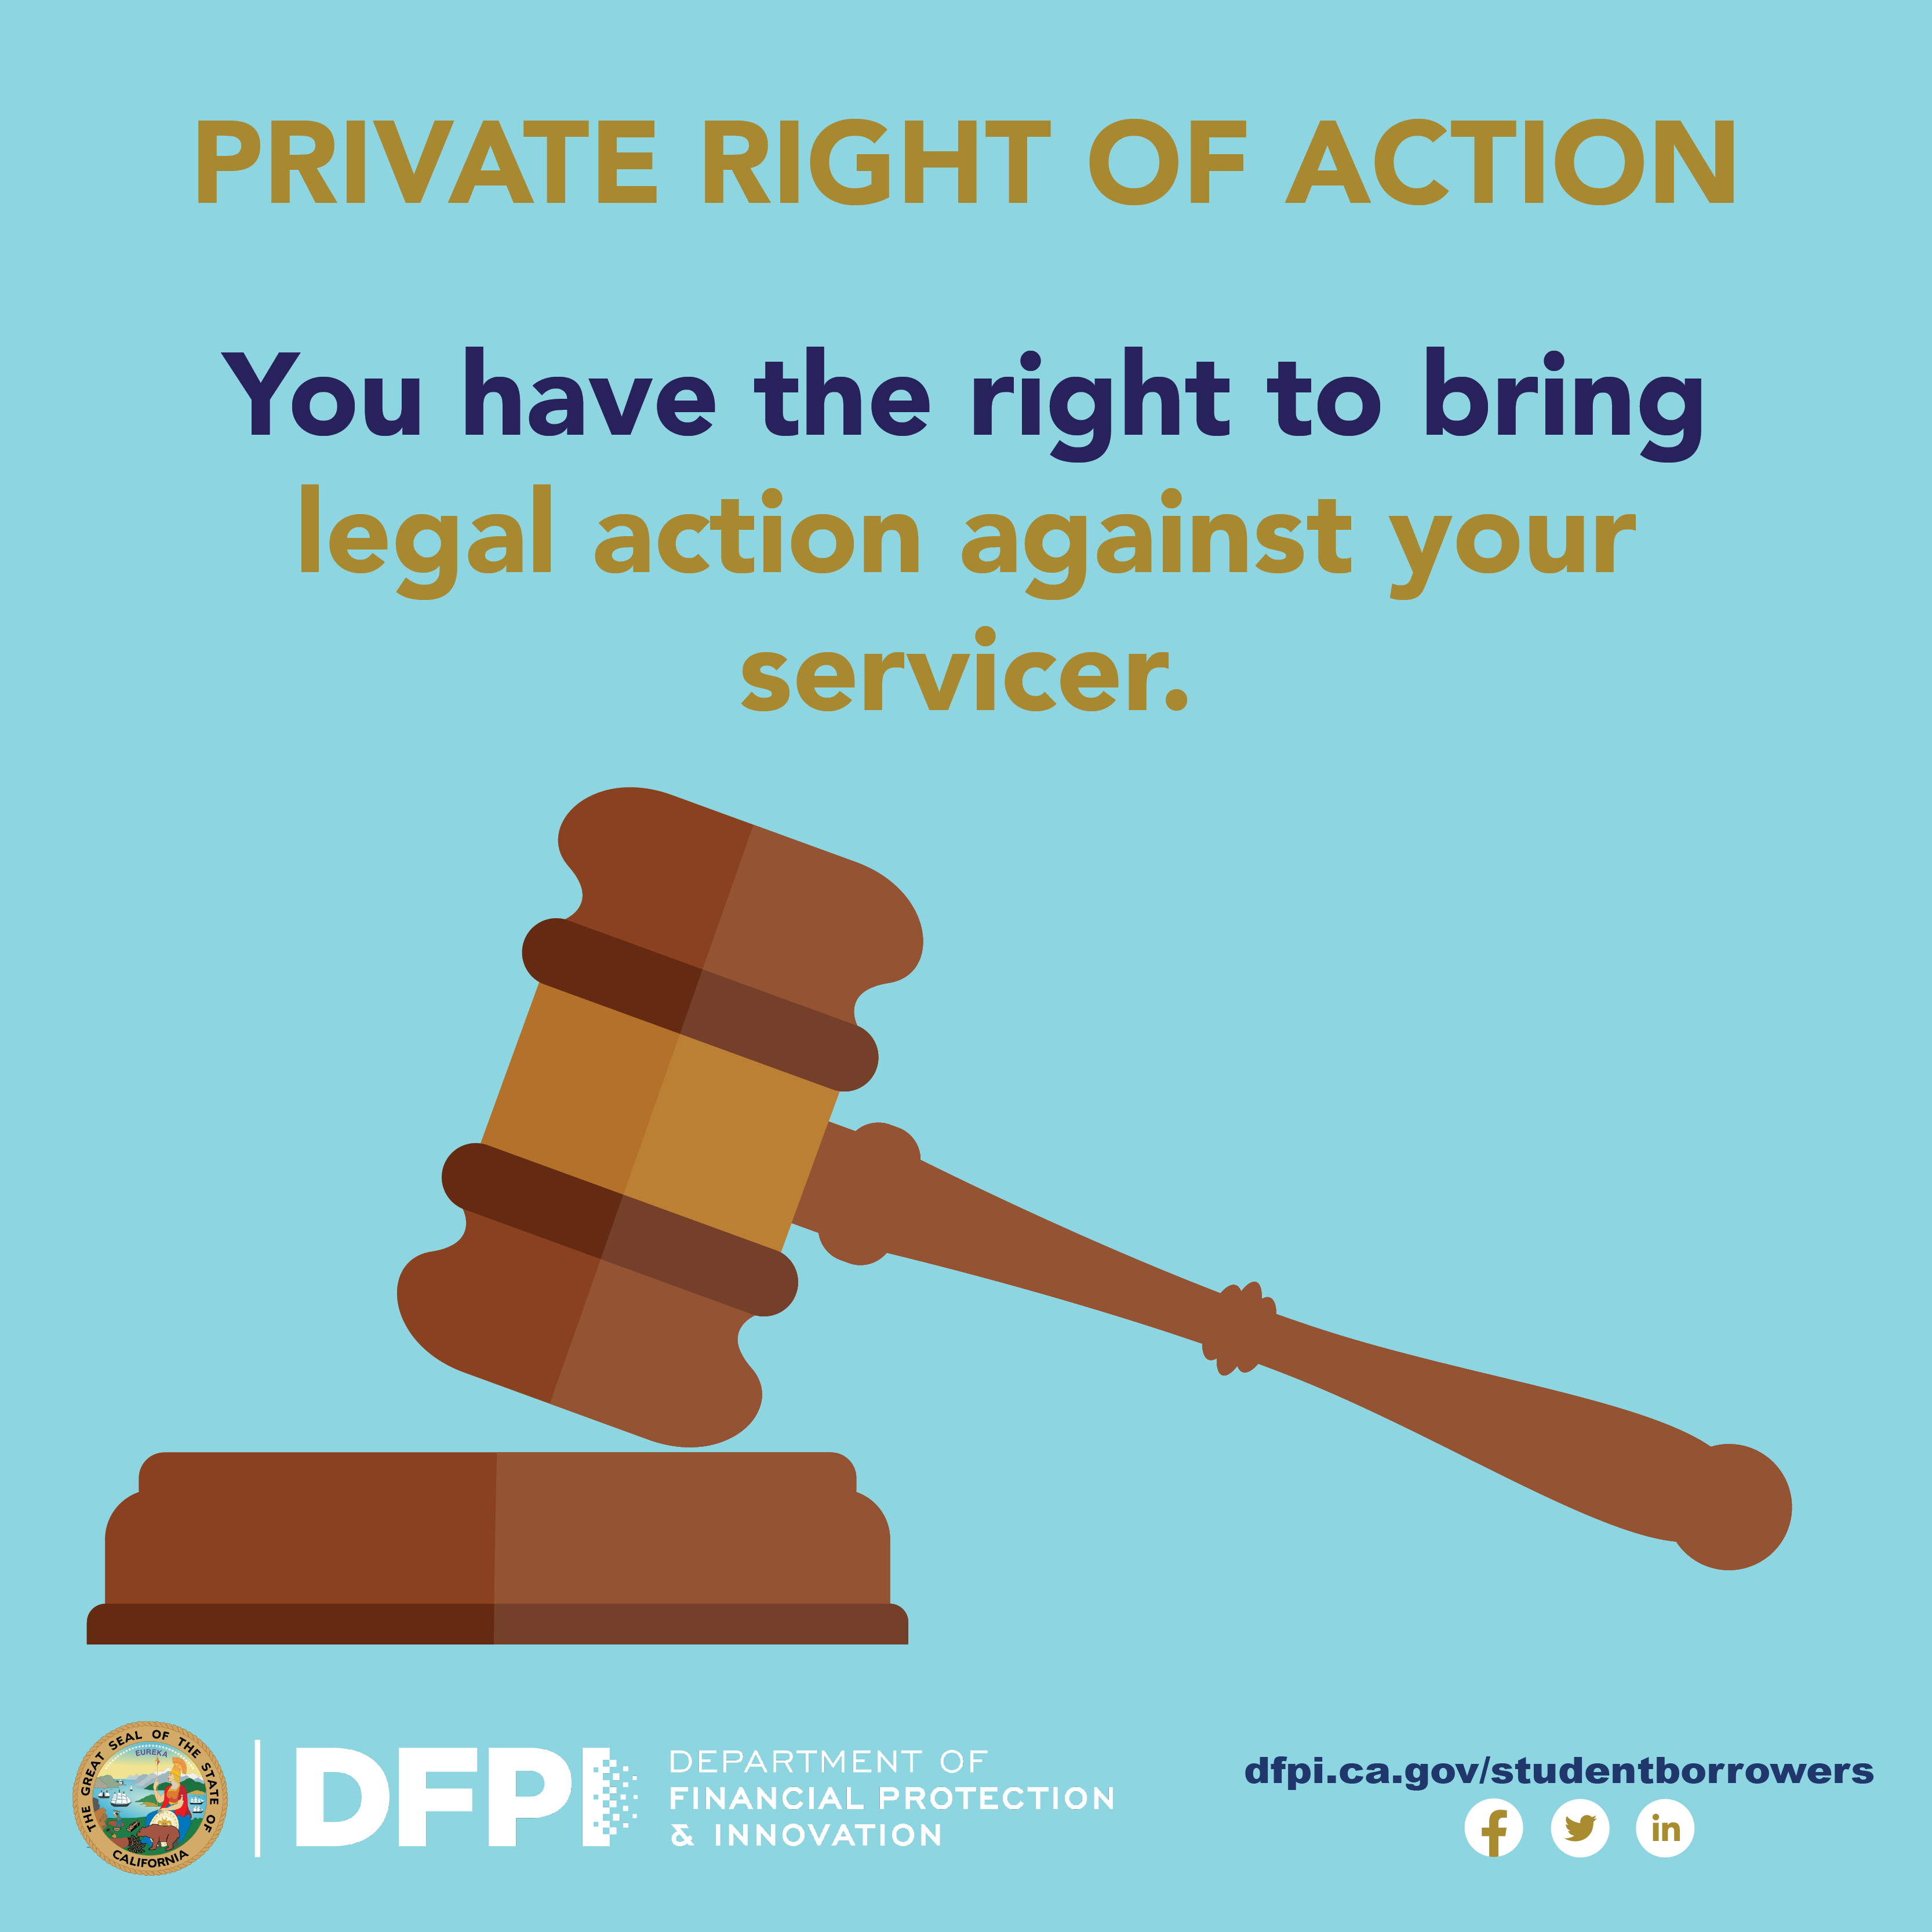 You have the right to bring legal action against your servicer